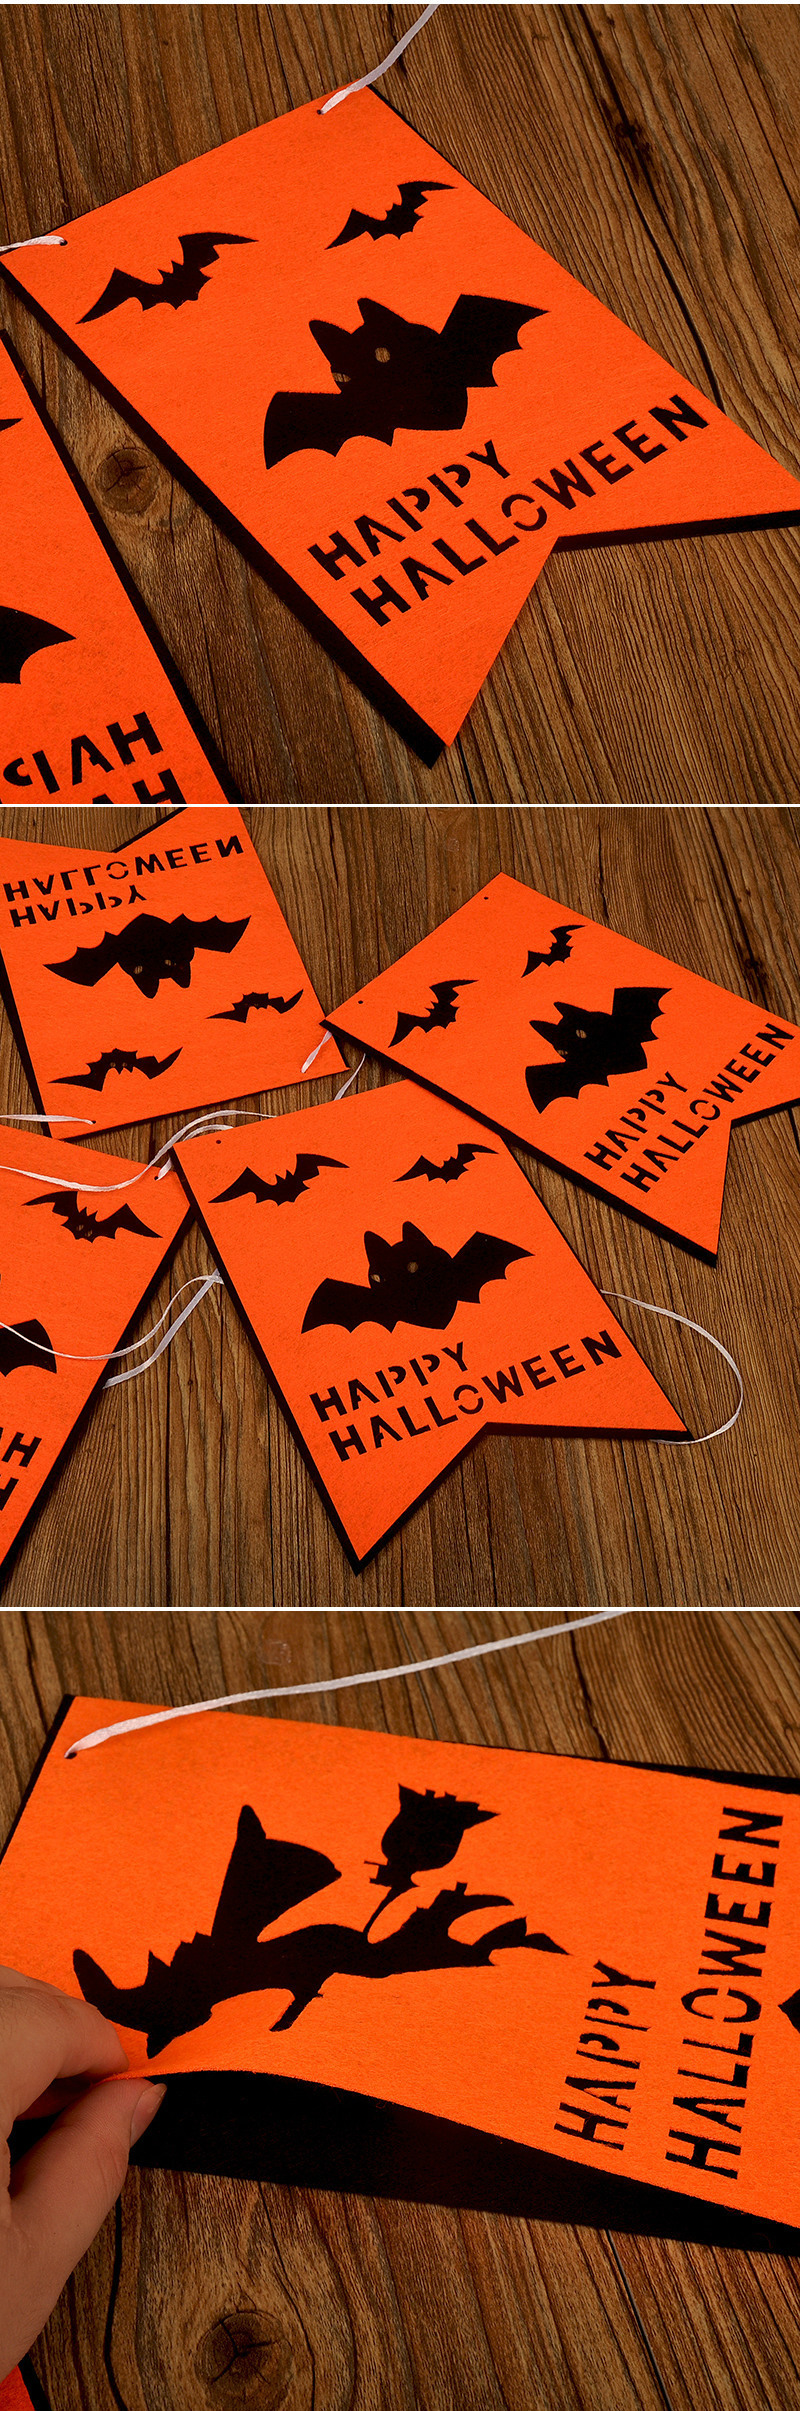 1-Set-Halloween-Hanging-Holiday-Party-Decoration-Ornaments-DIY-Pull-Flag-Castle-Pumpkin-Bat-Witch-1198637